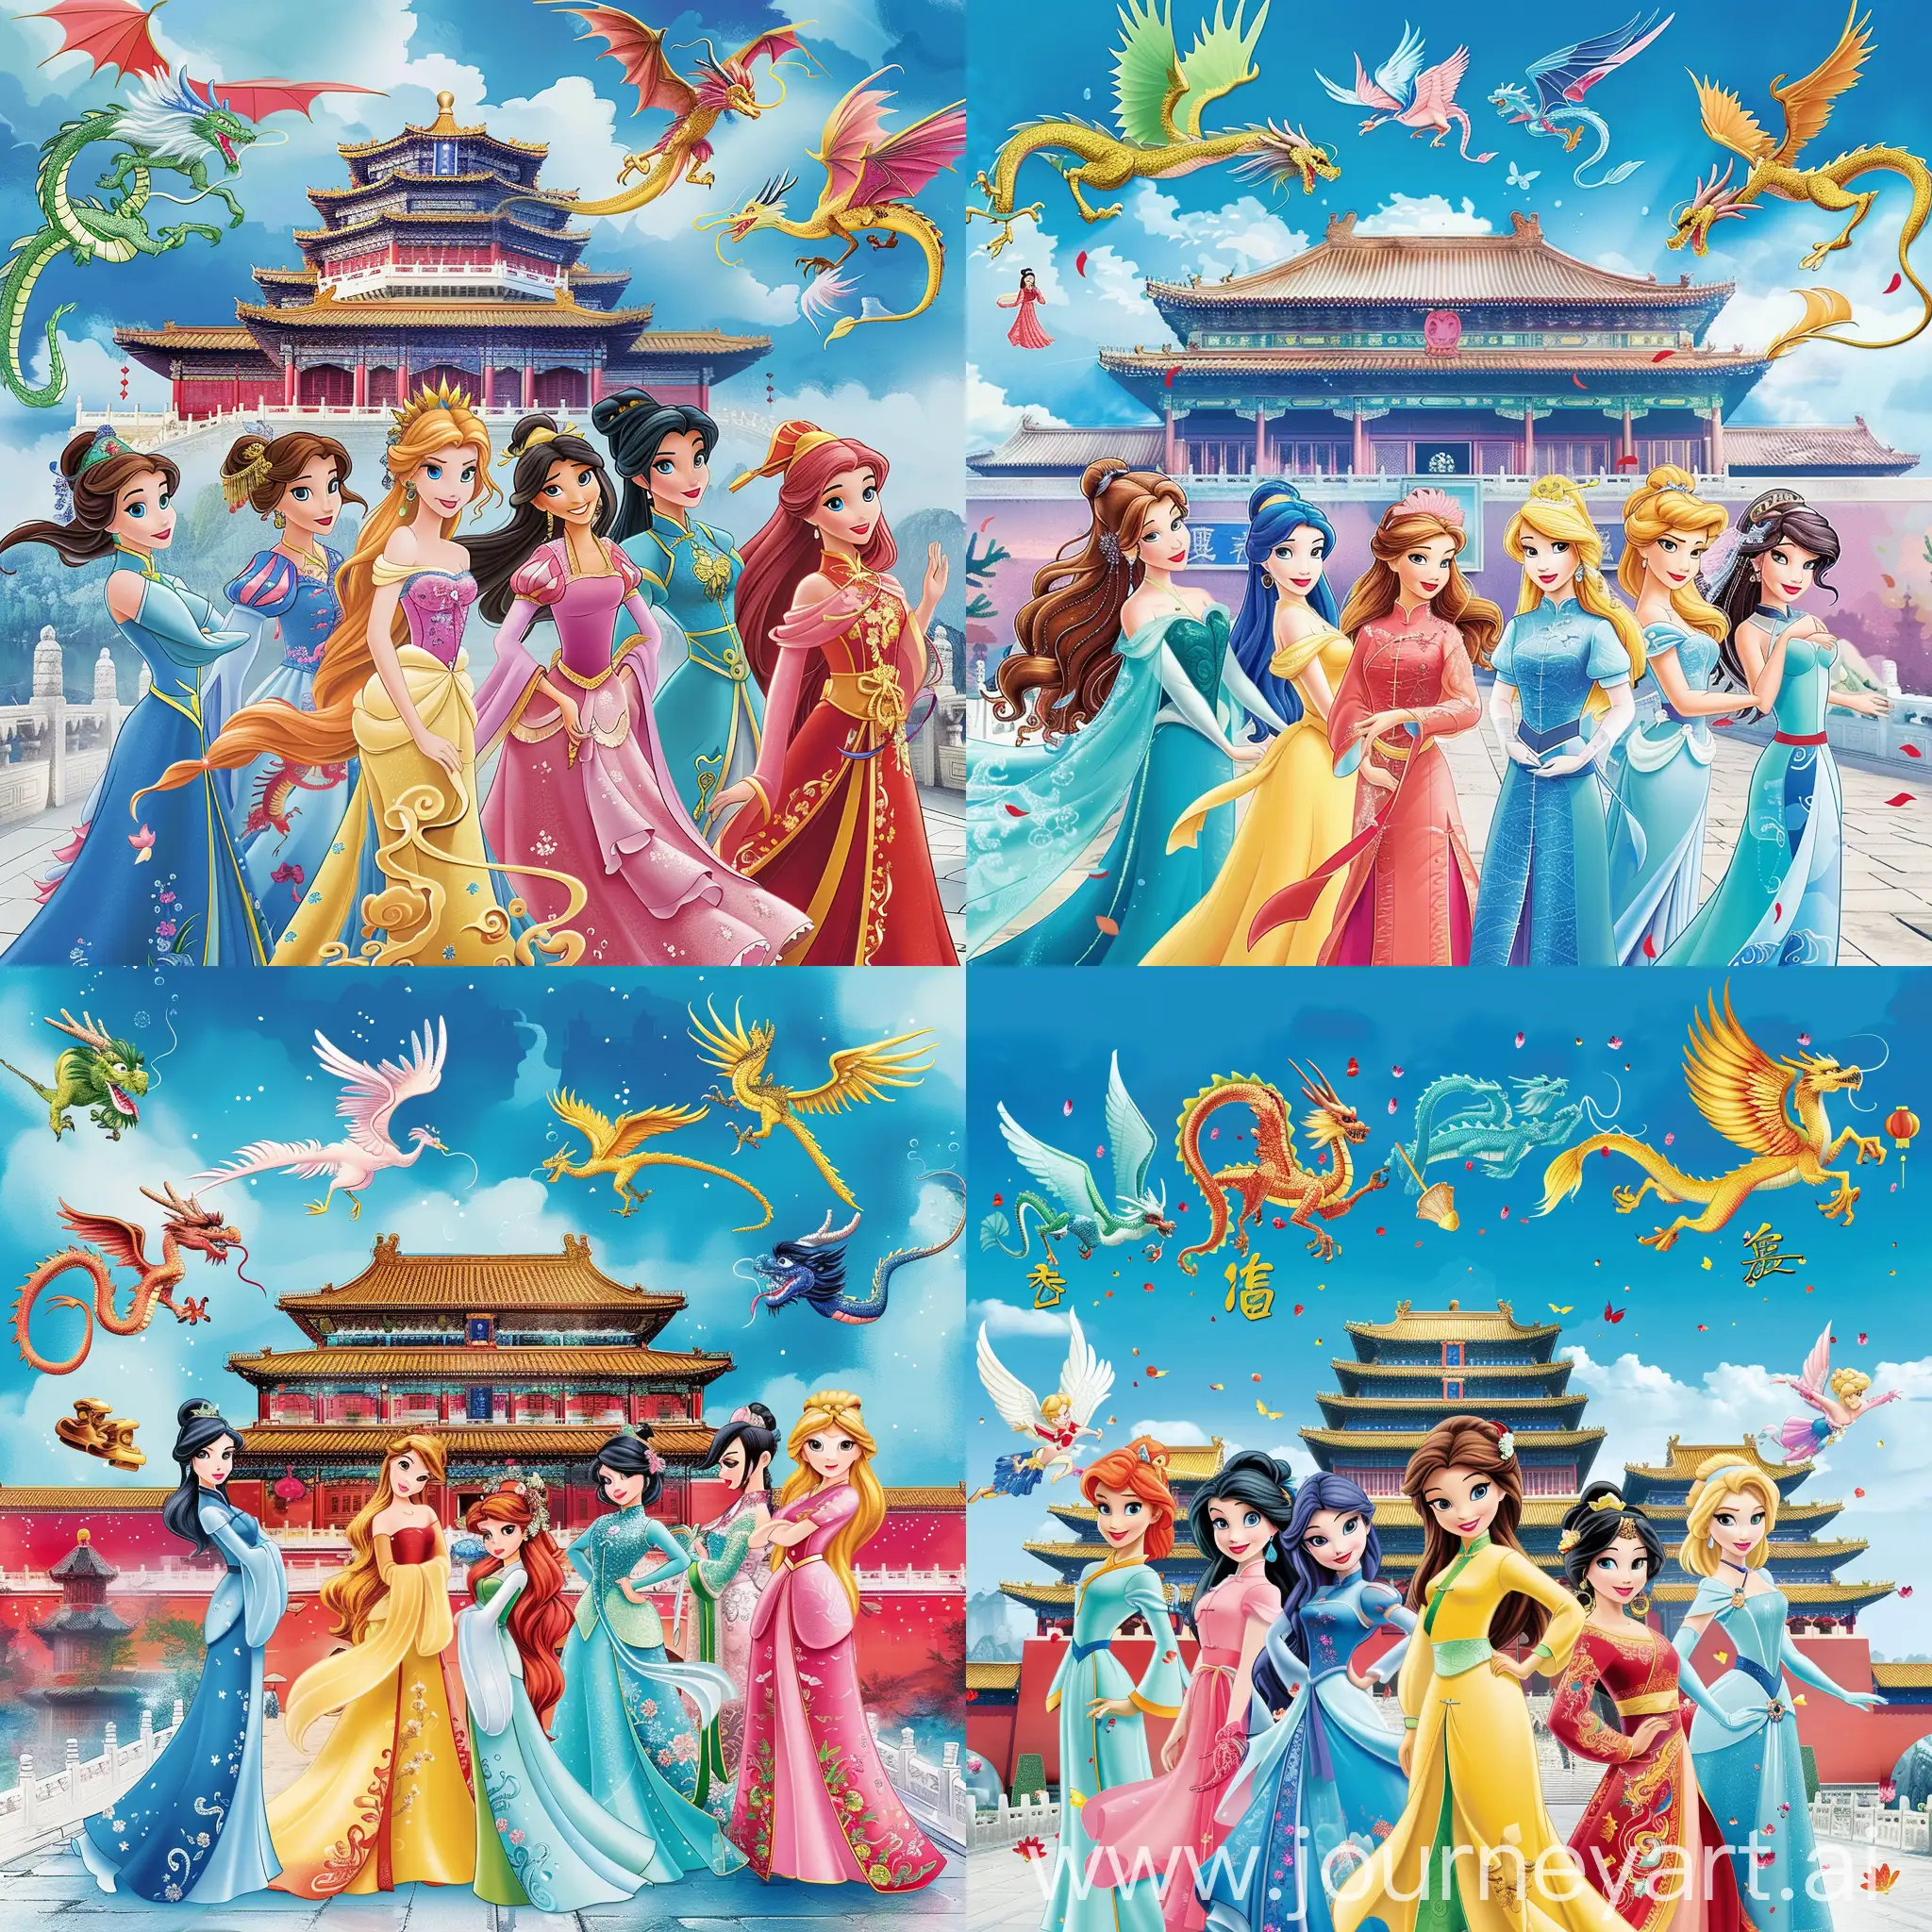 seven Disney Princess: Ariel, Aurora, Rapunzel, Belle, Cinderella, Snow White, Elsa,

they are all in Chinese female costume Hanfu, of their own colors,

before a Chinese Palace, Chinese dragons amd phoenixes in the blue sky,